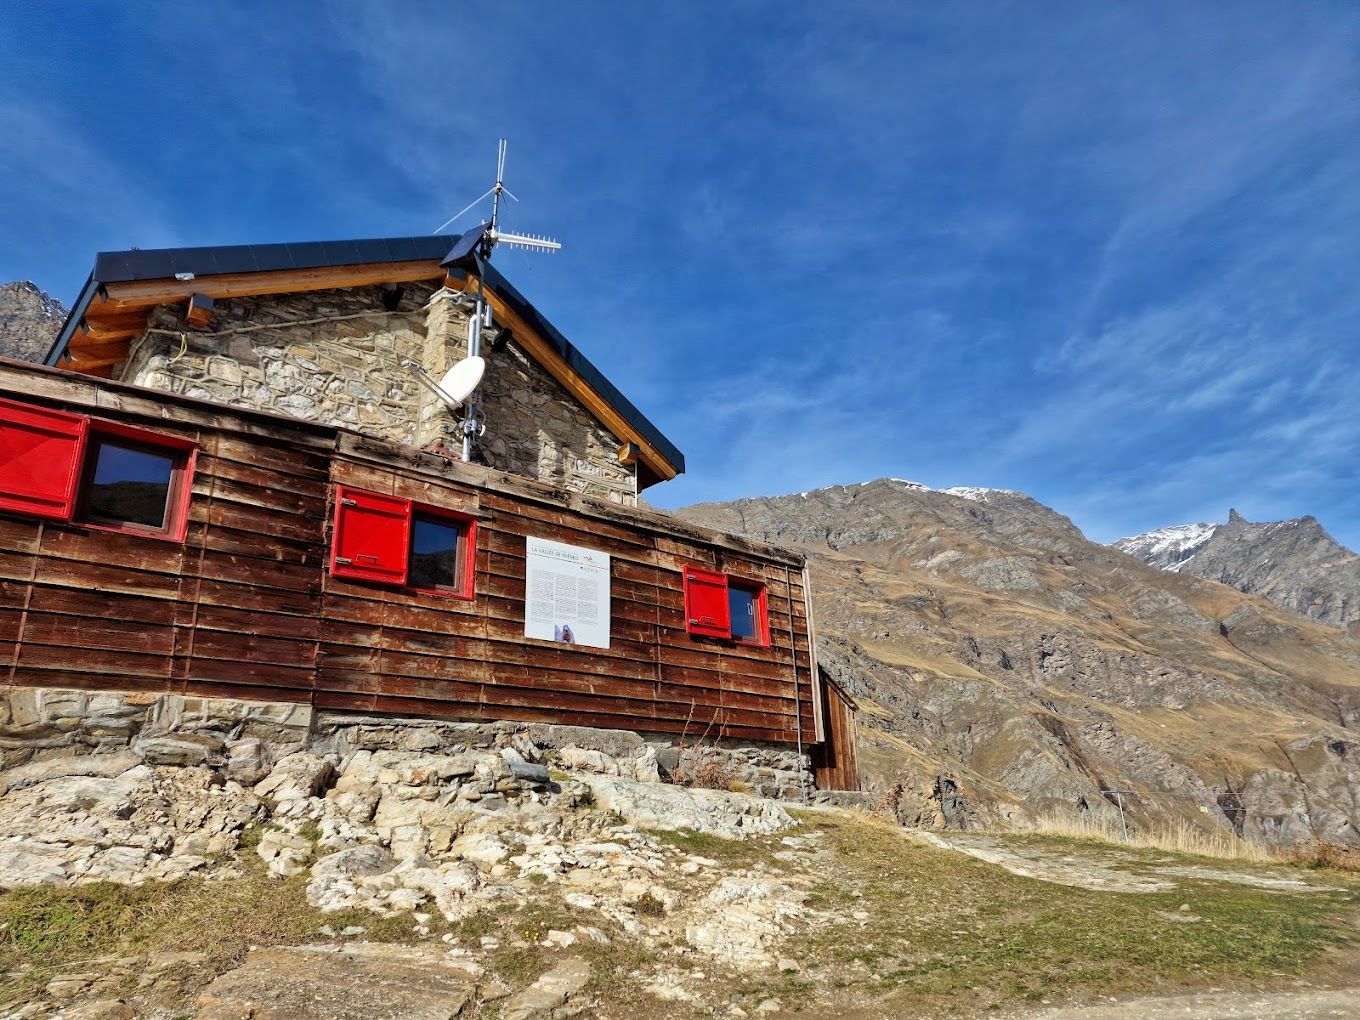 A mountain hut in Italy's Gran Paradiso. Photo: Verticalife.